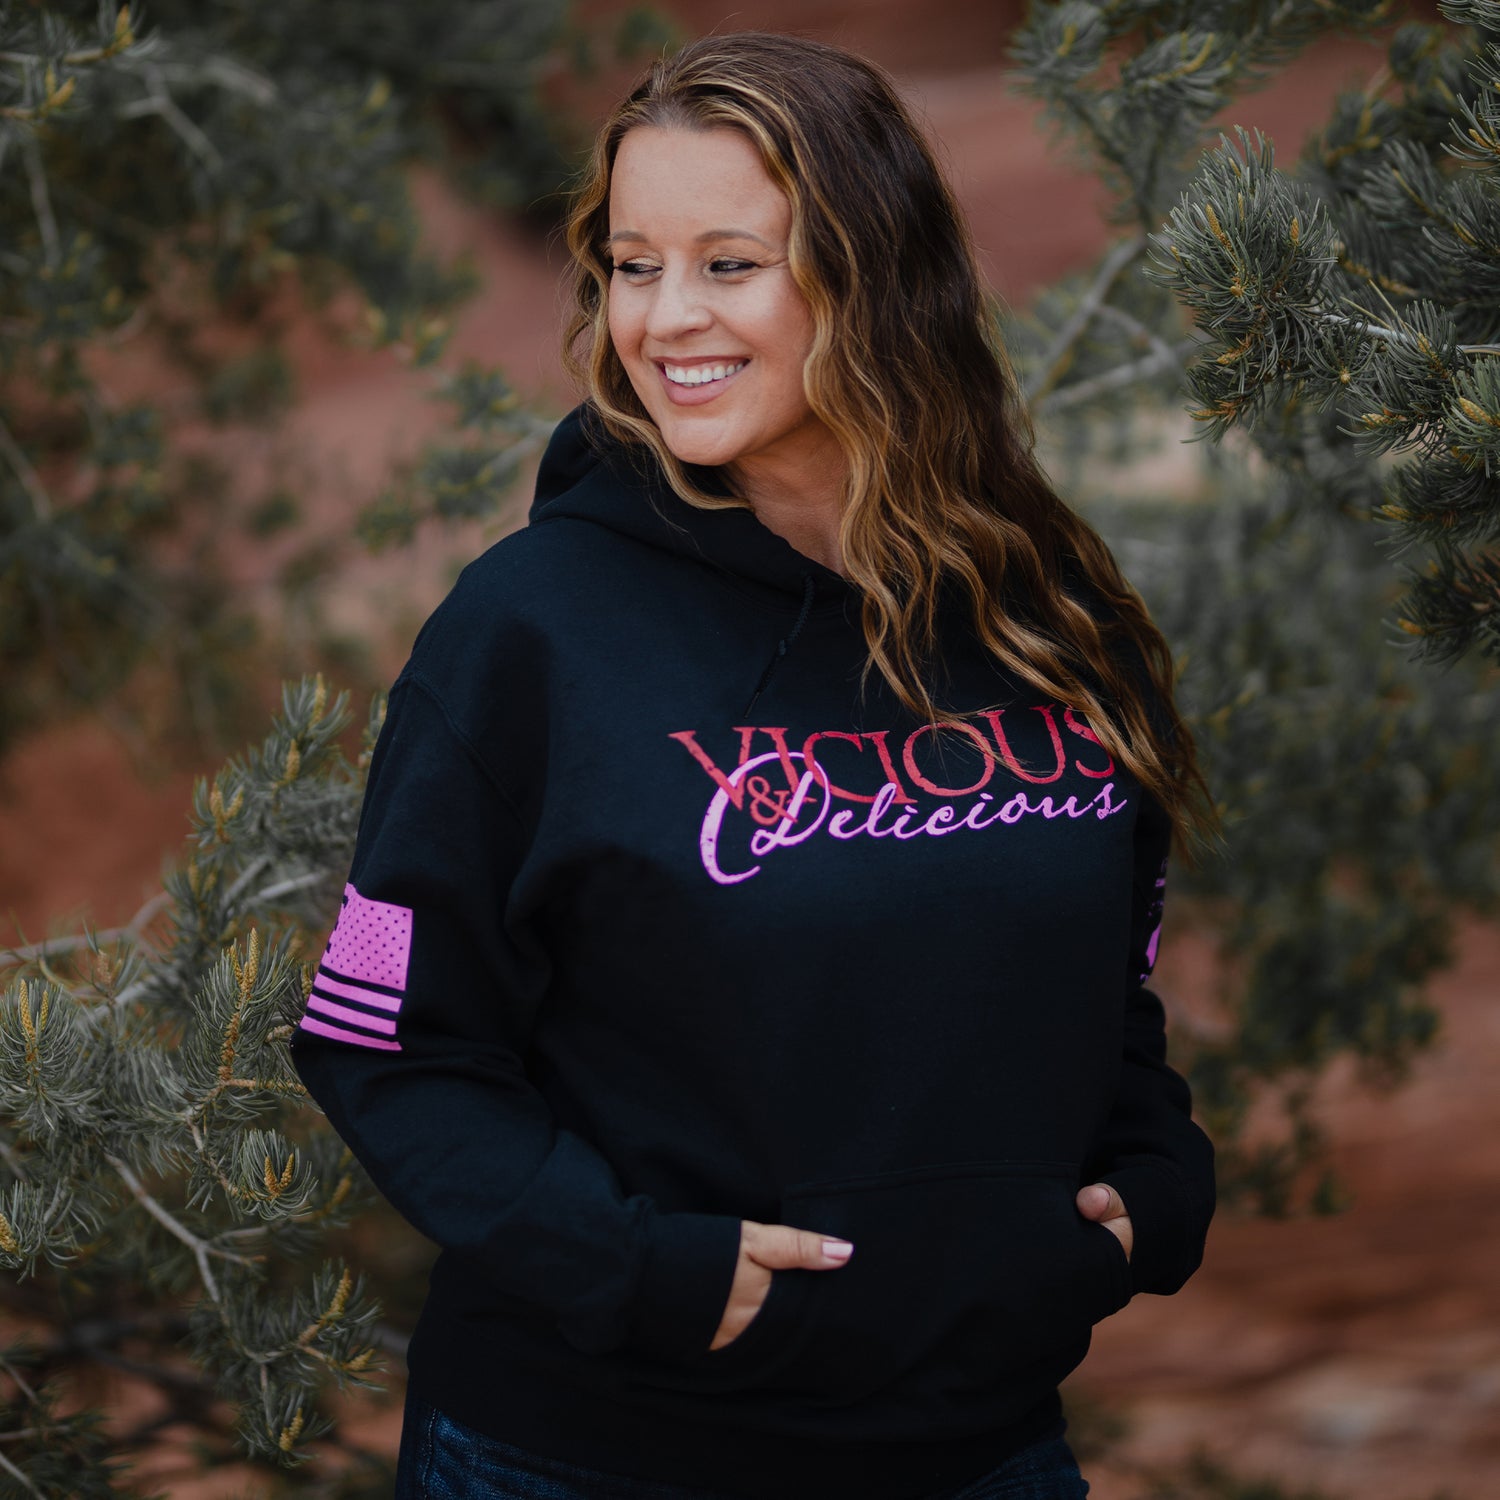 Vicious & Delicious Hooded Sweatshirt for Women | Grunt Style 